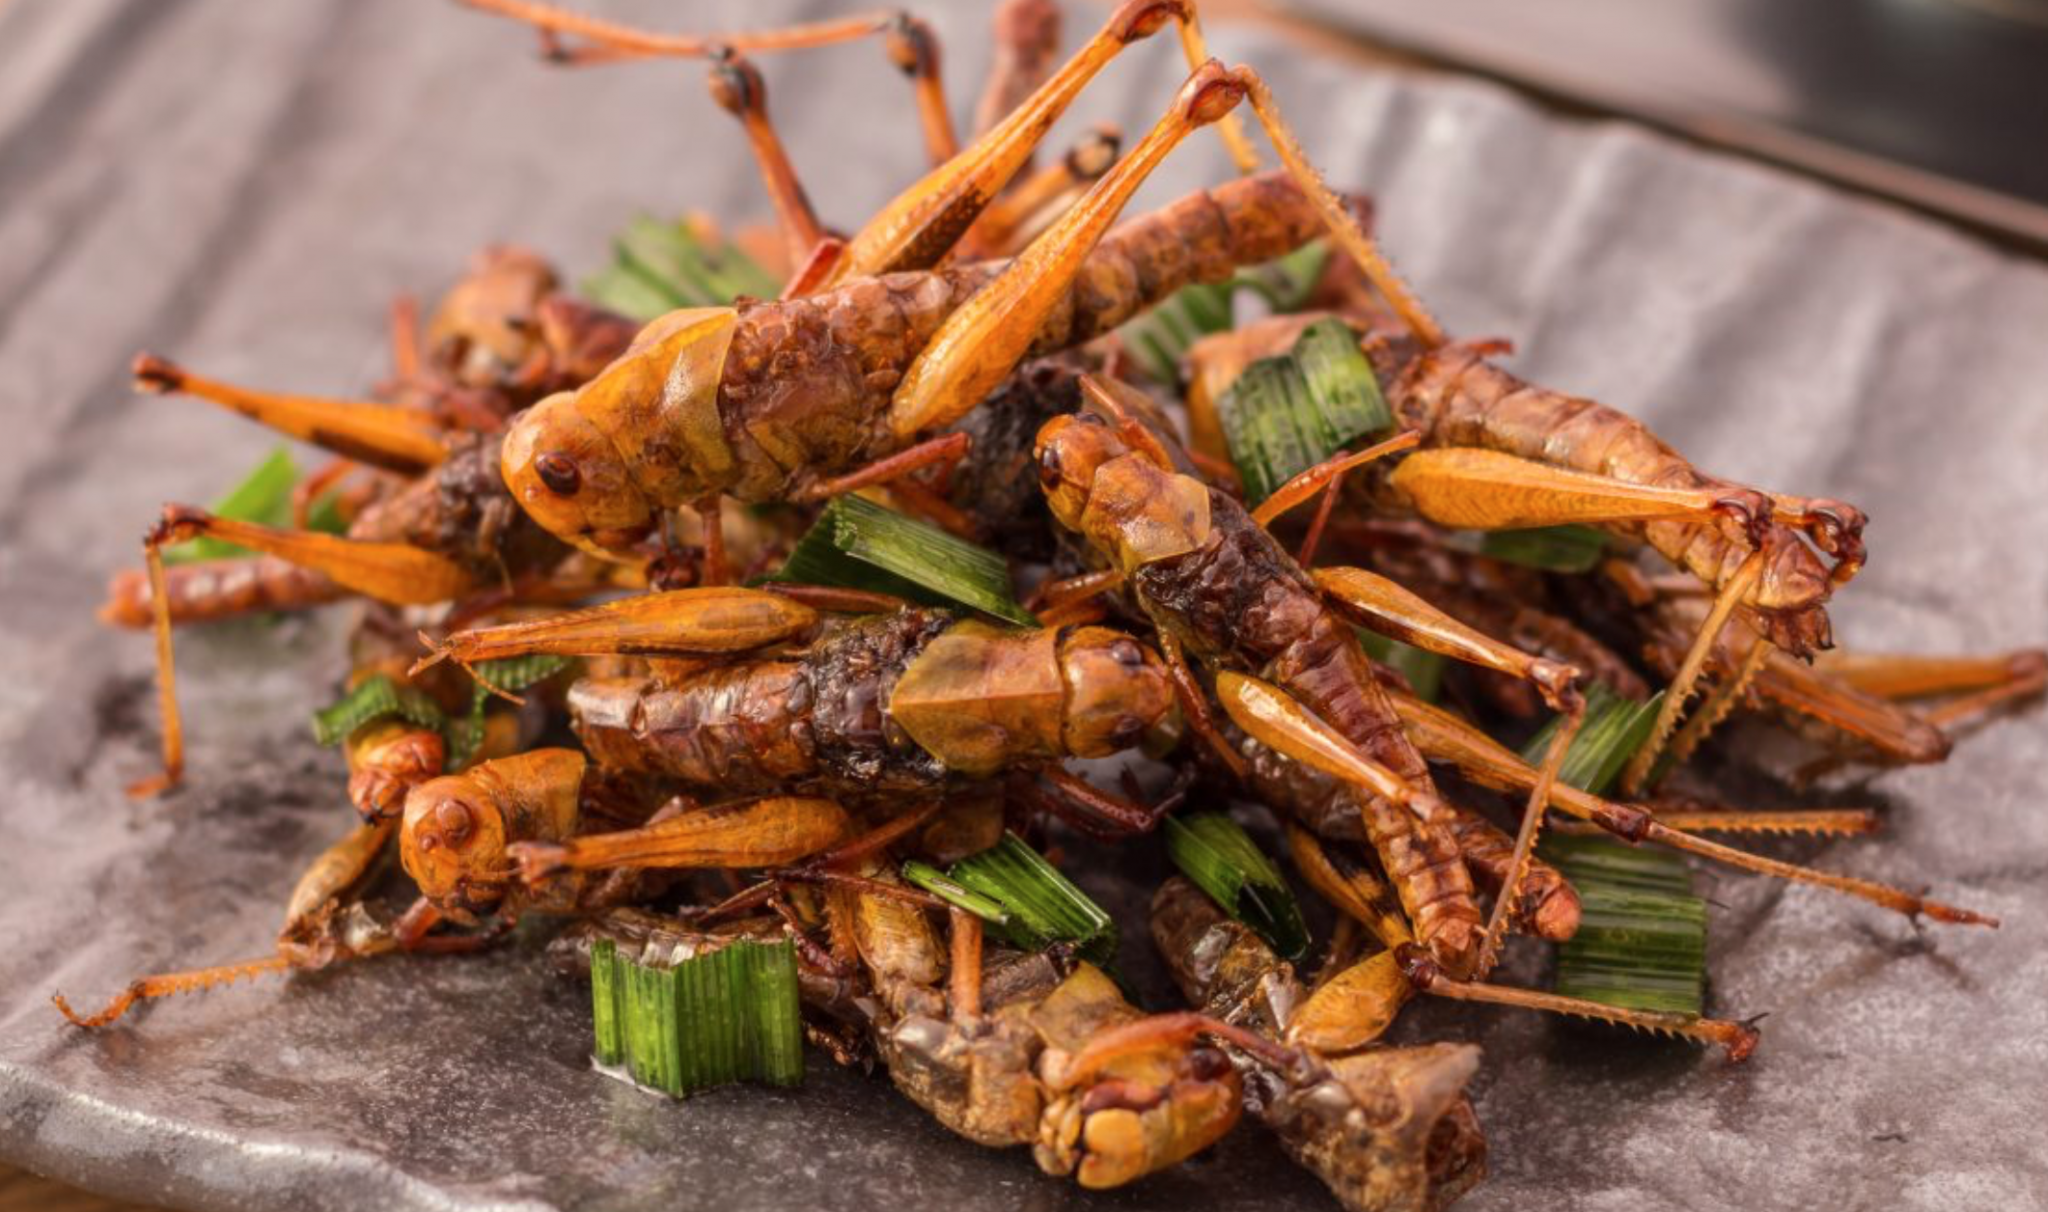 what are edible insects